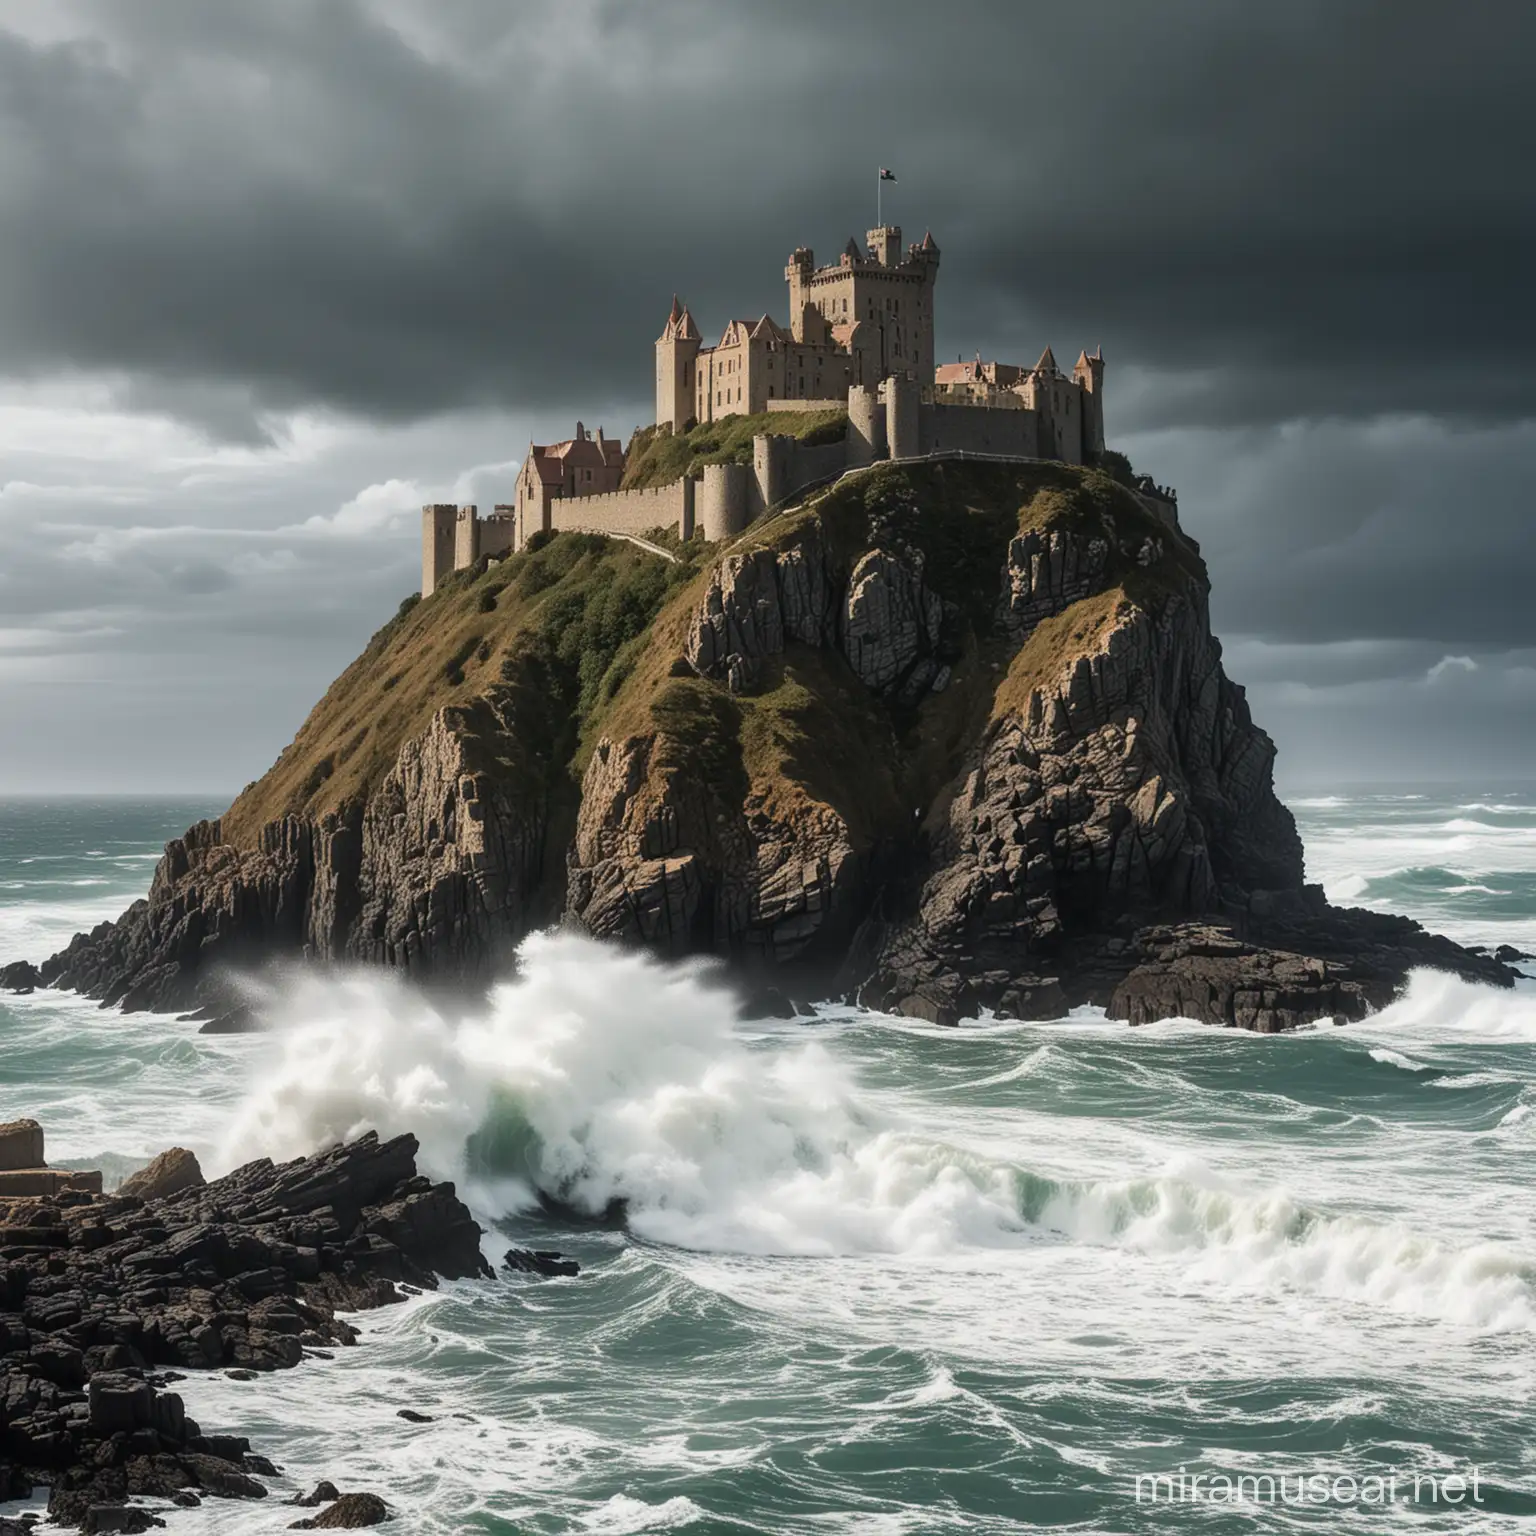 A castle sitting on the edge of a bluff overlooking the ocean while waves from a storm crash against the rocky shore